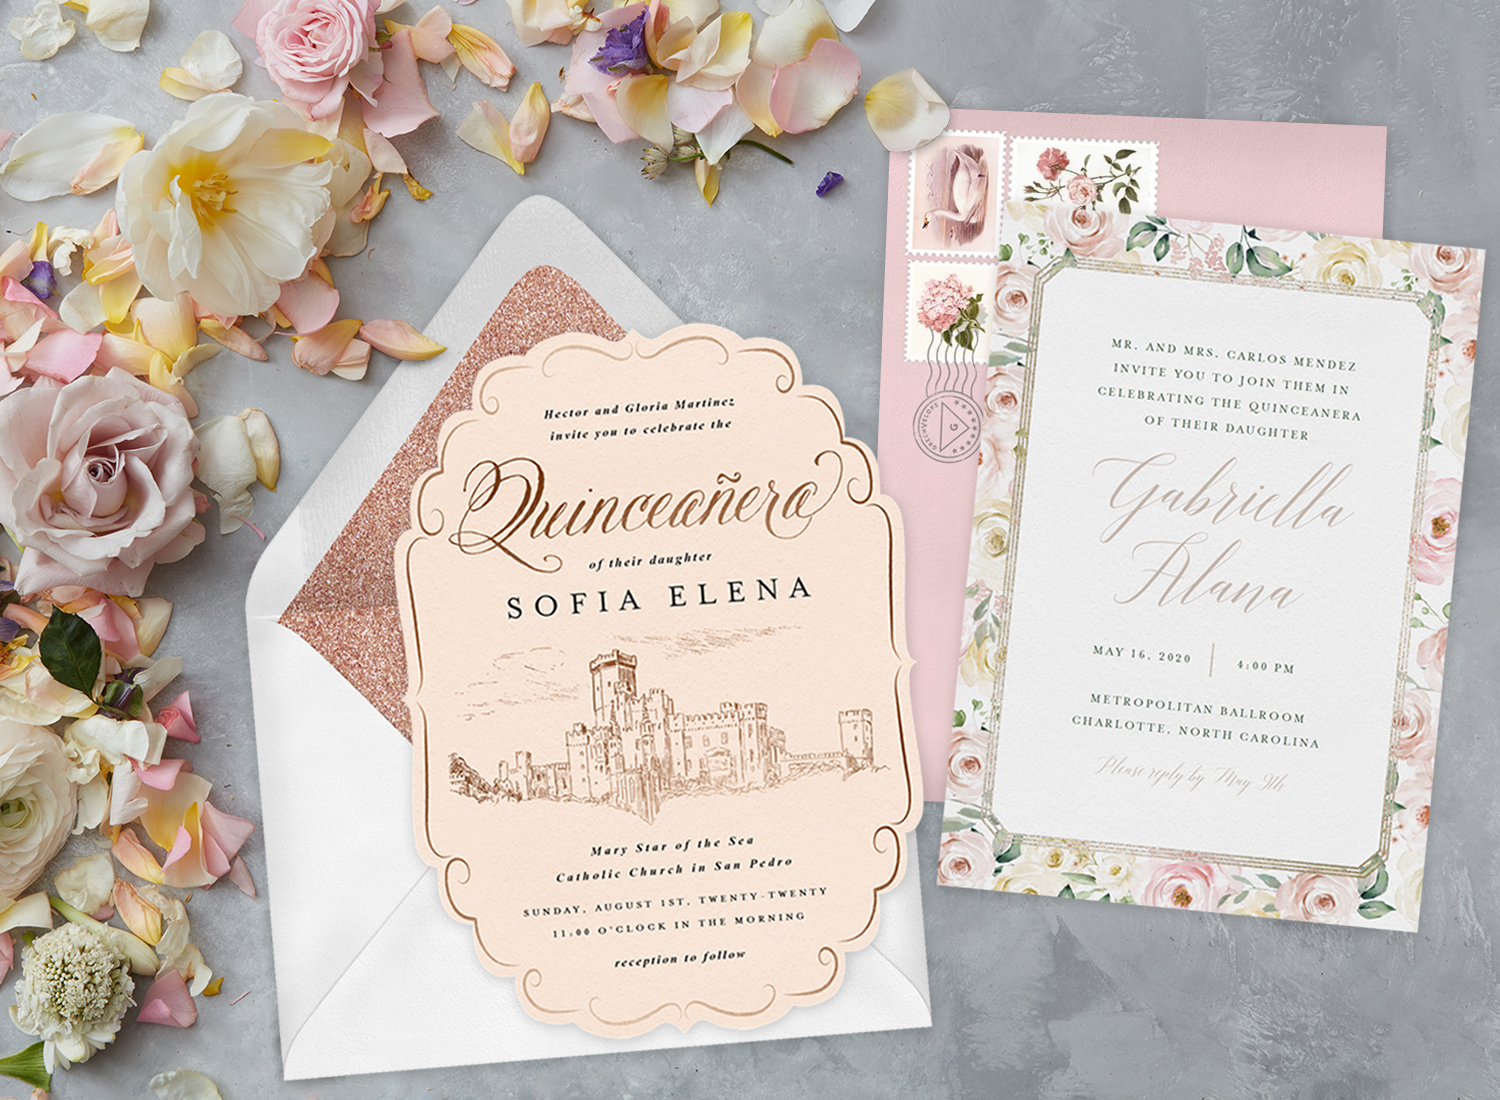 Two quinceañera invitations with envelopes, surrounded by fresh flowers